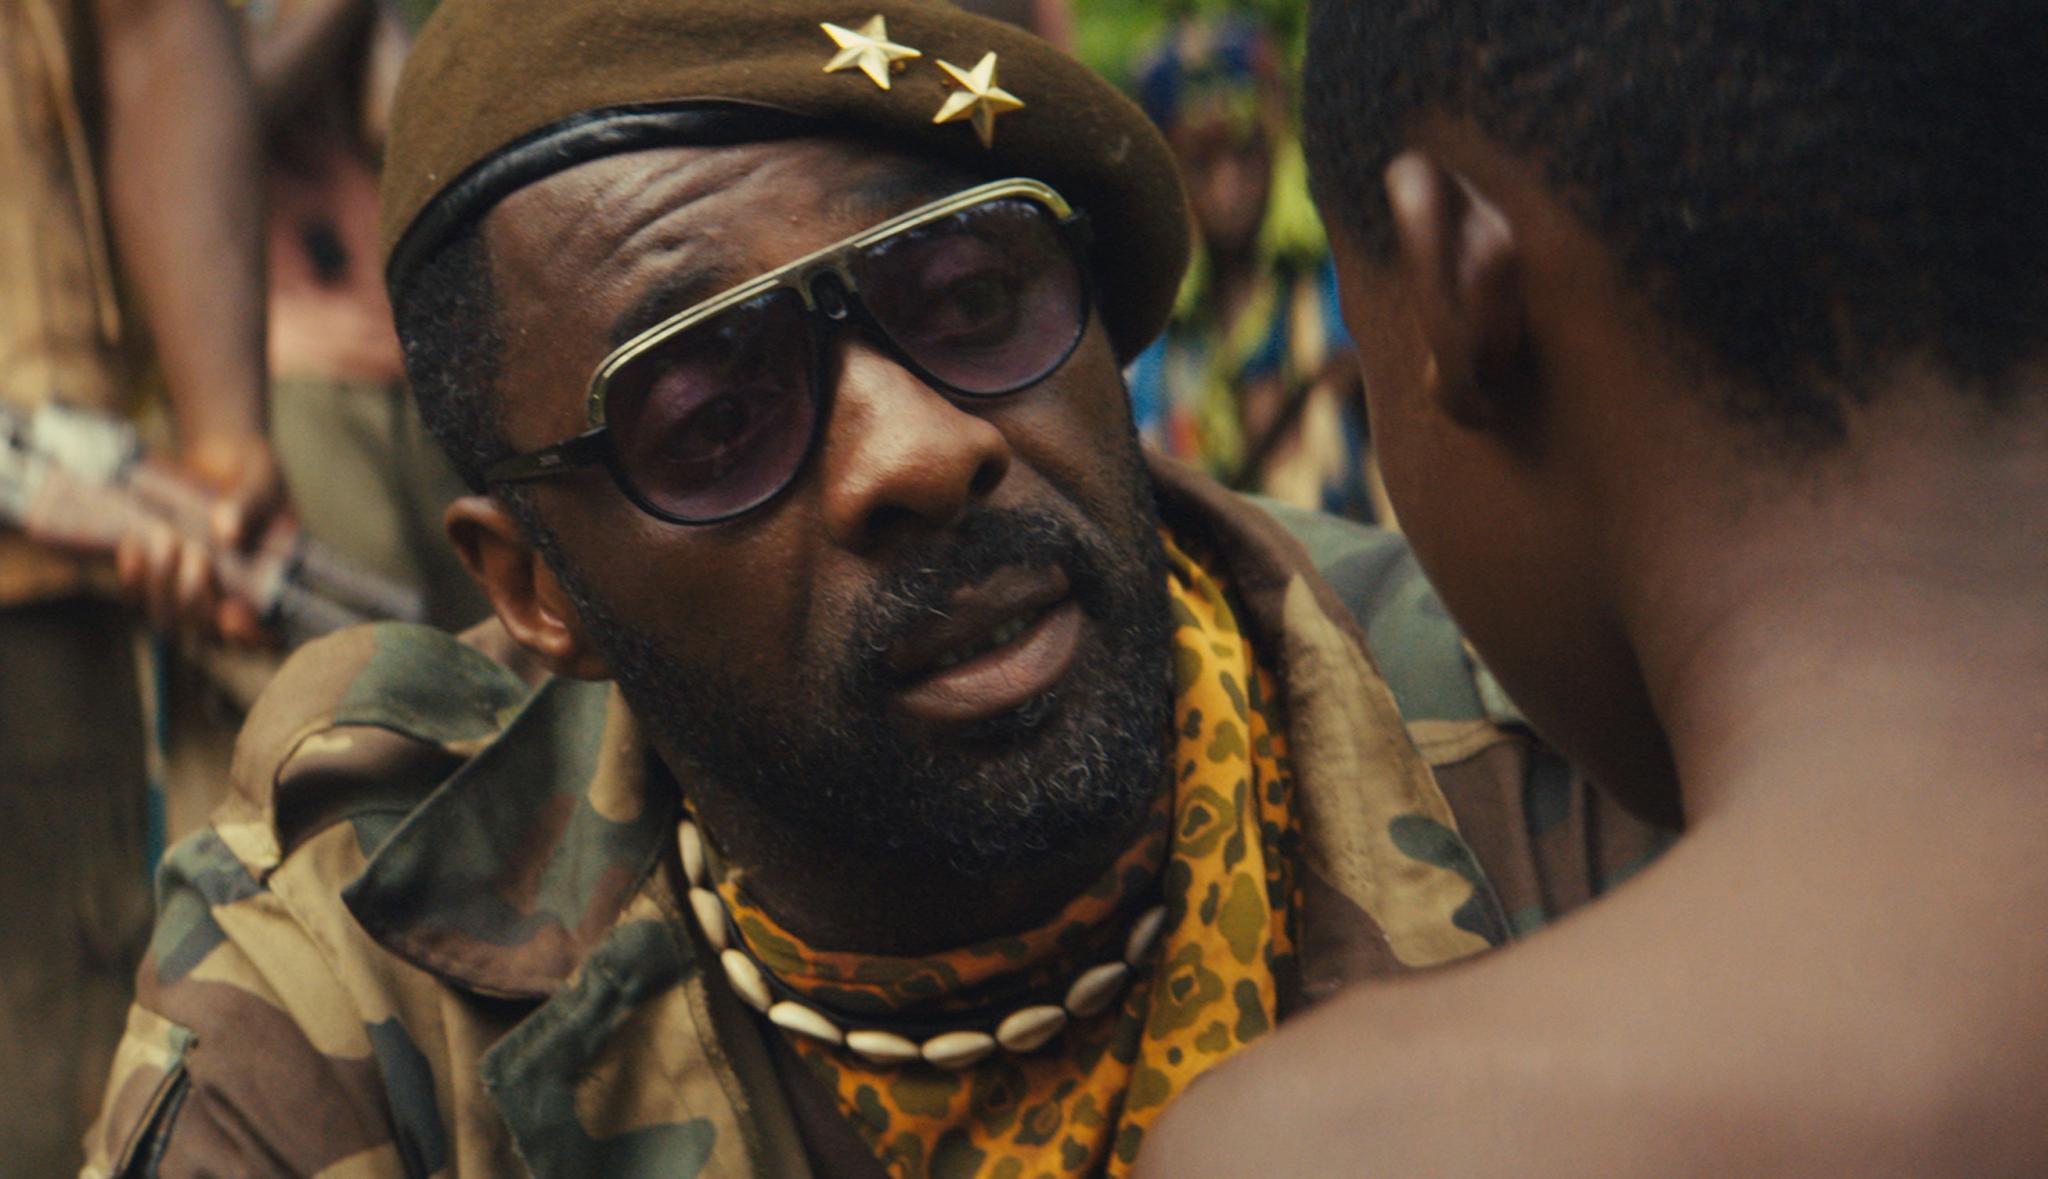 Idris Elba and Abraham Attah Deliver Gripping Performances in 'Beasts of No Nation'